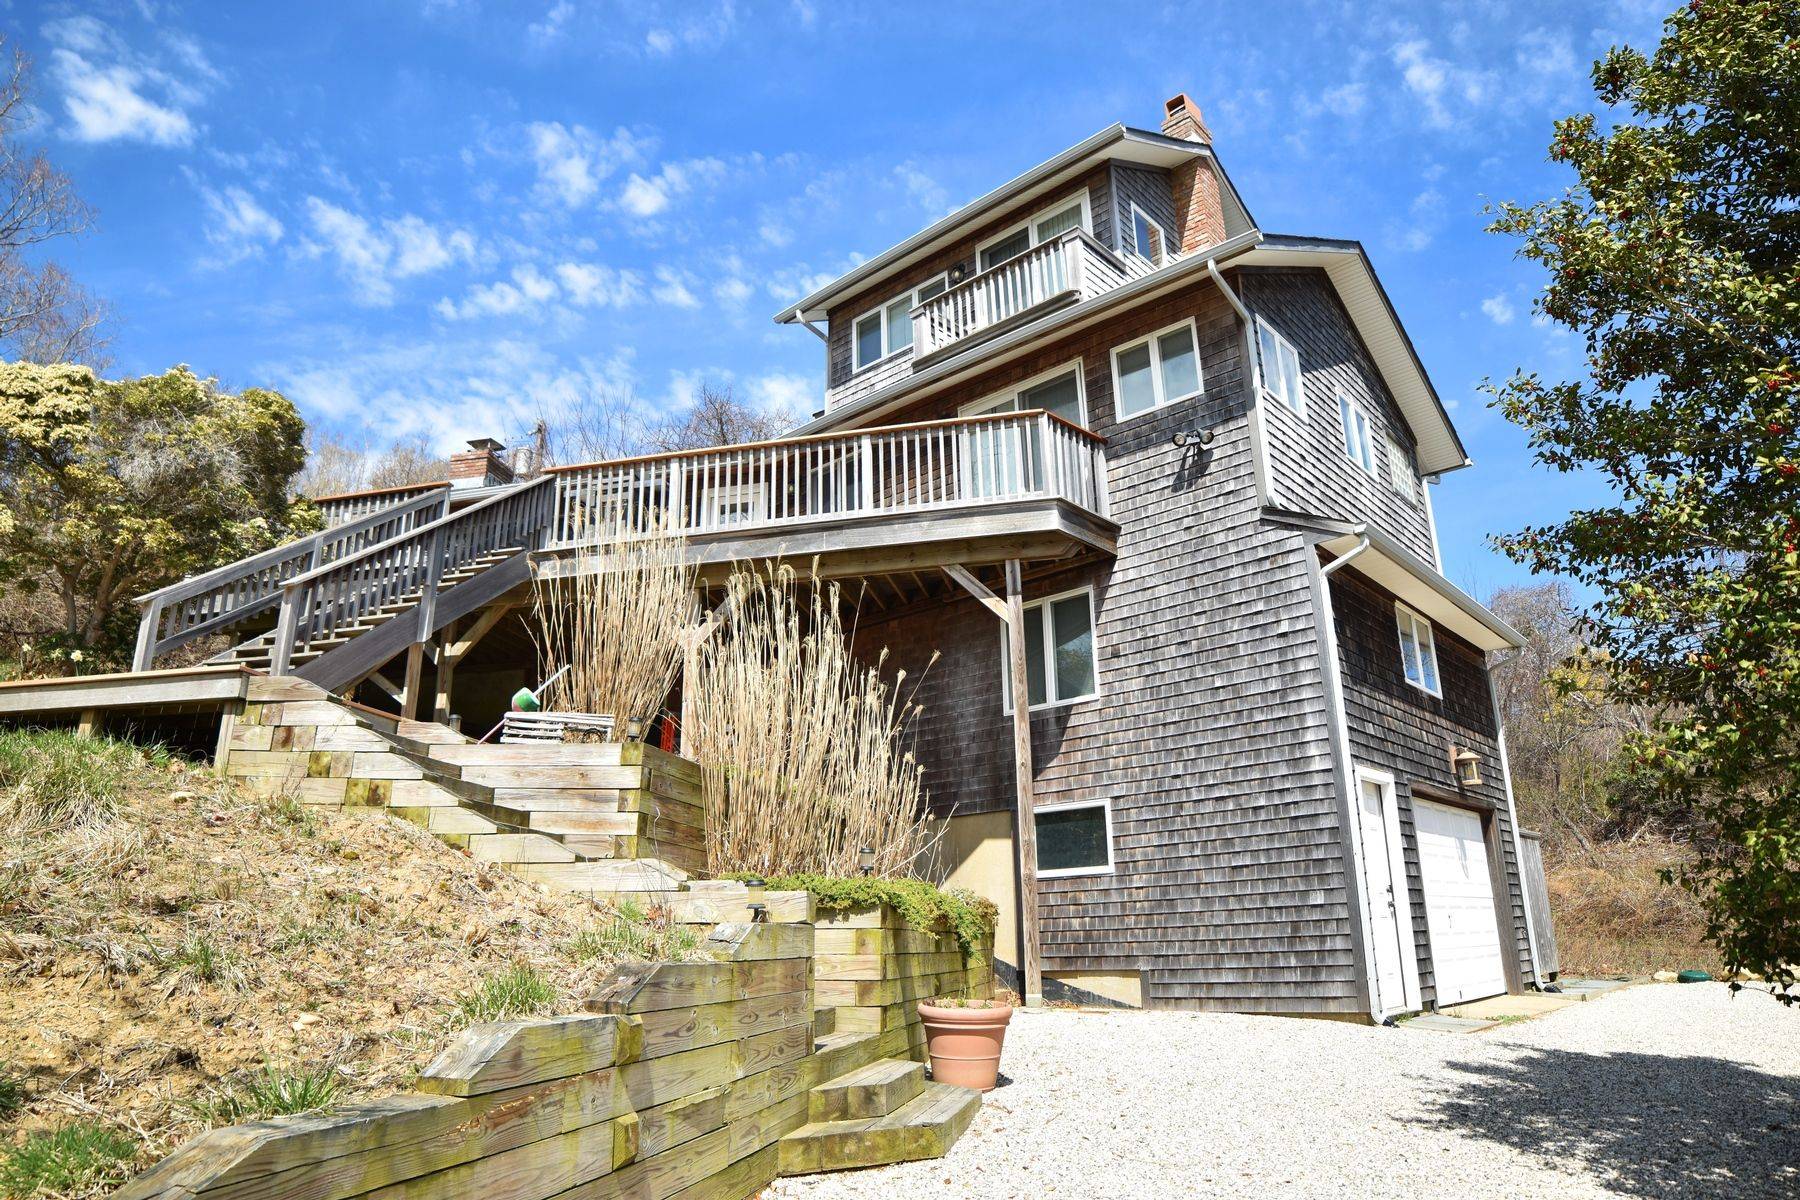 Private Deeded Access to Ocean Beach